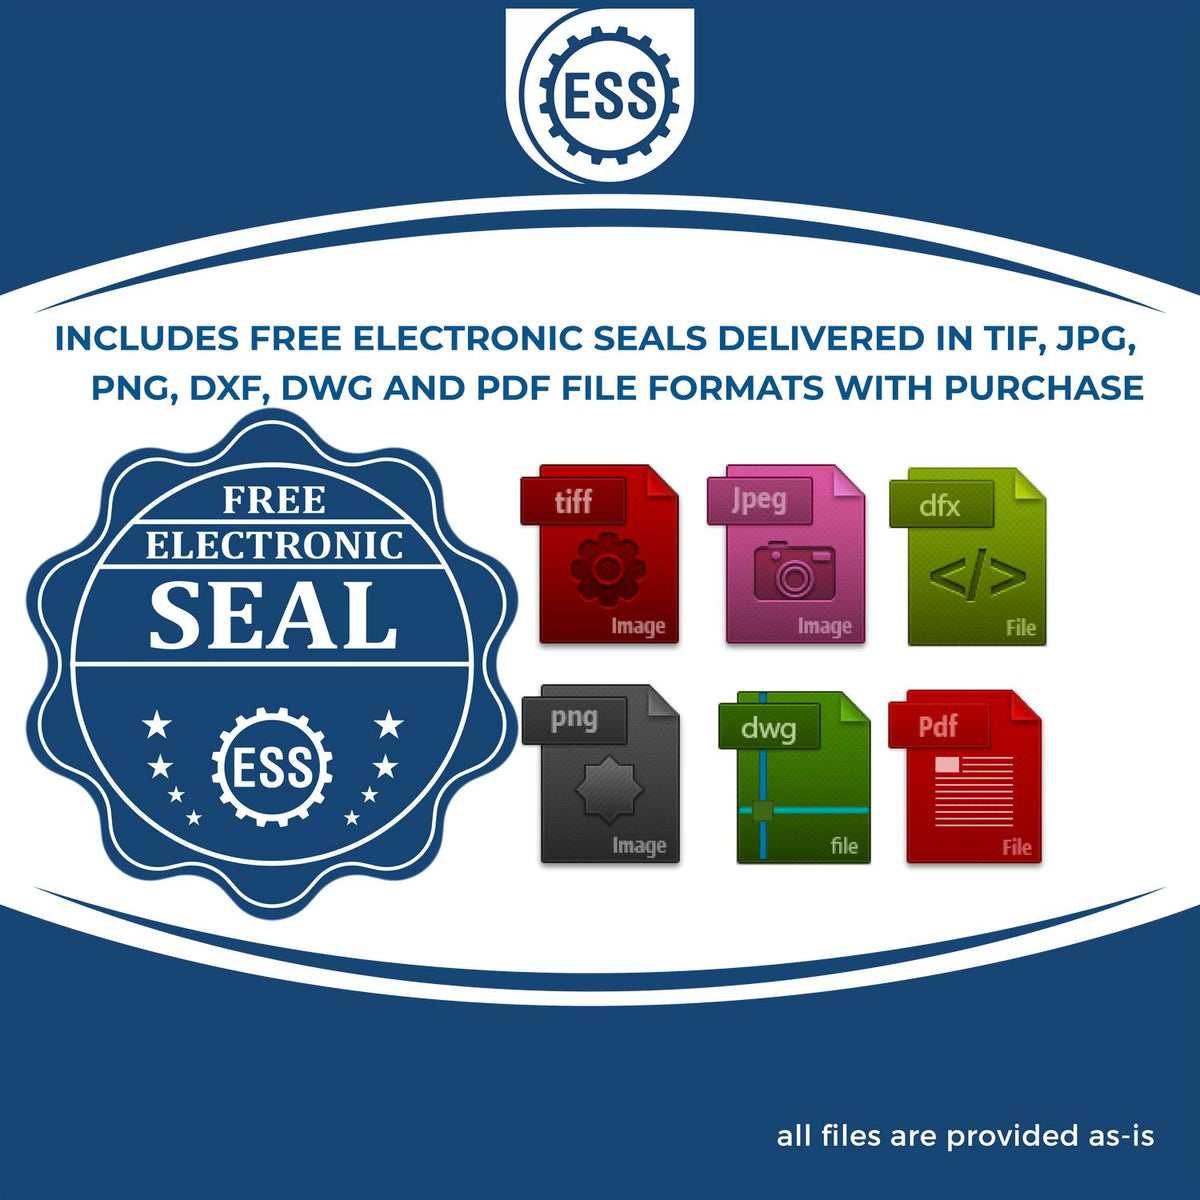 An infographic for the free electronic seal for the Heavy Duty Cast Iron Vermont Engineer Seal Embosser illustrating the different file type icons such as DXF, DWG, TIF, JPG and PNG.